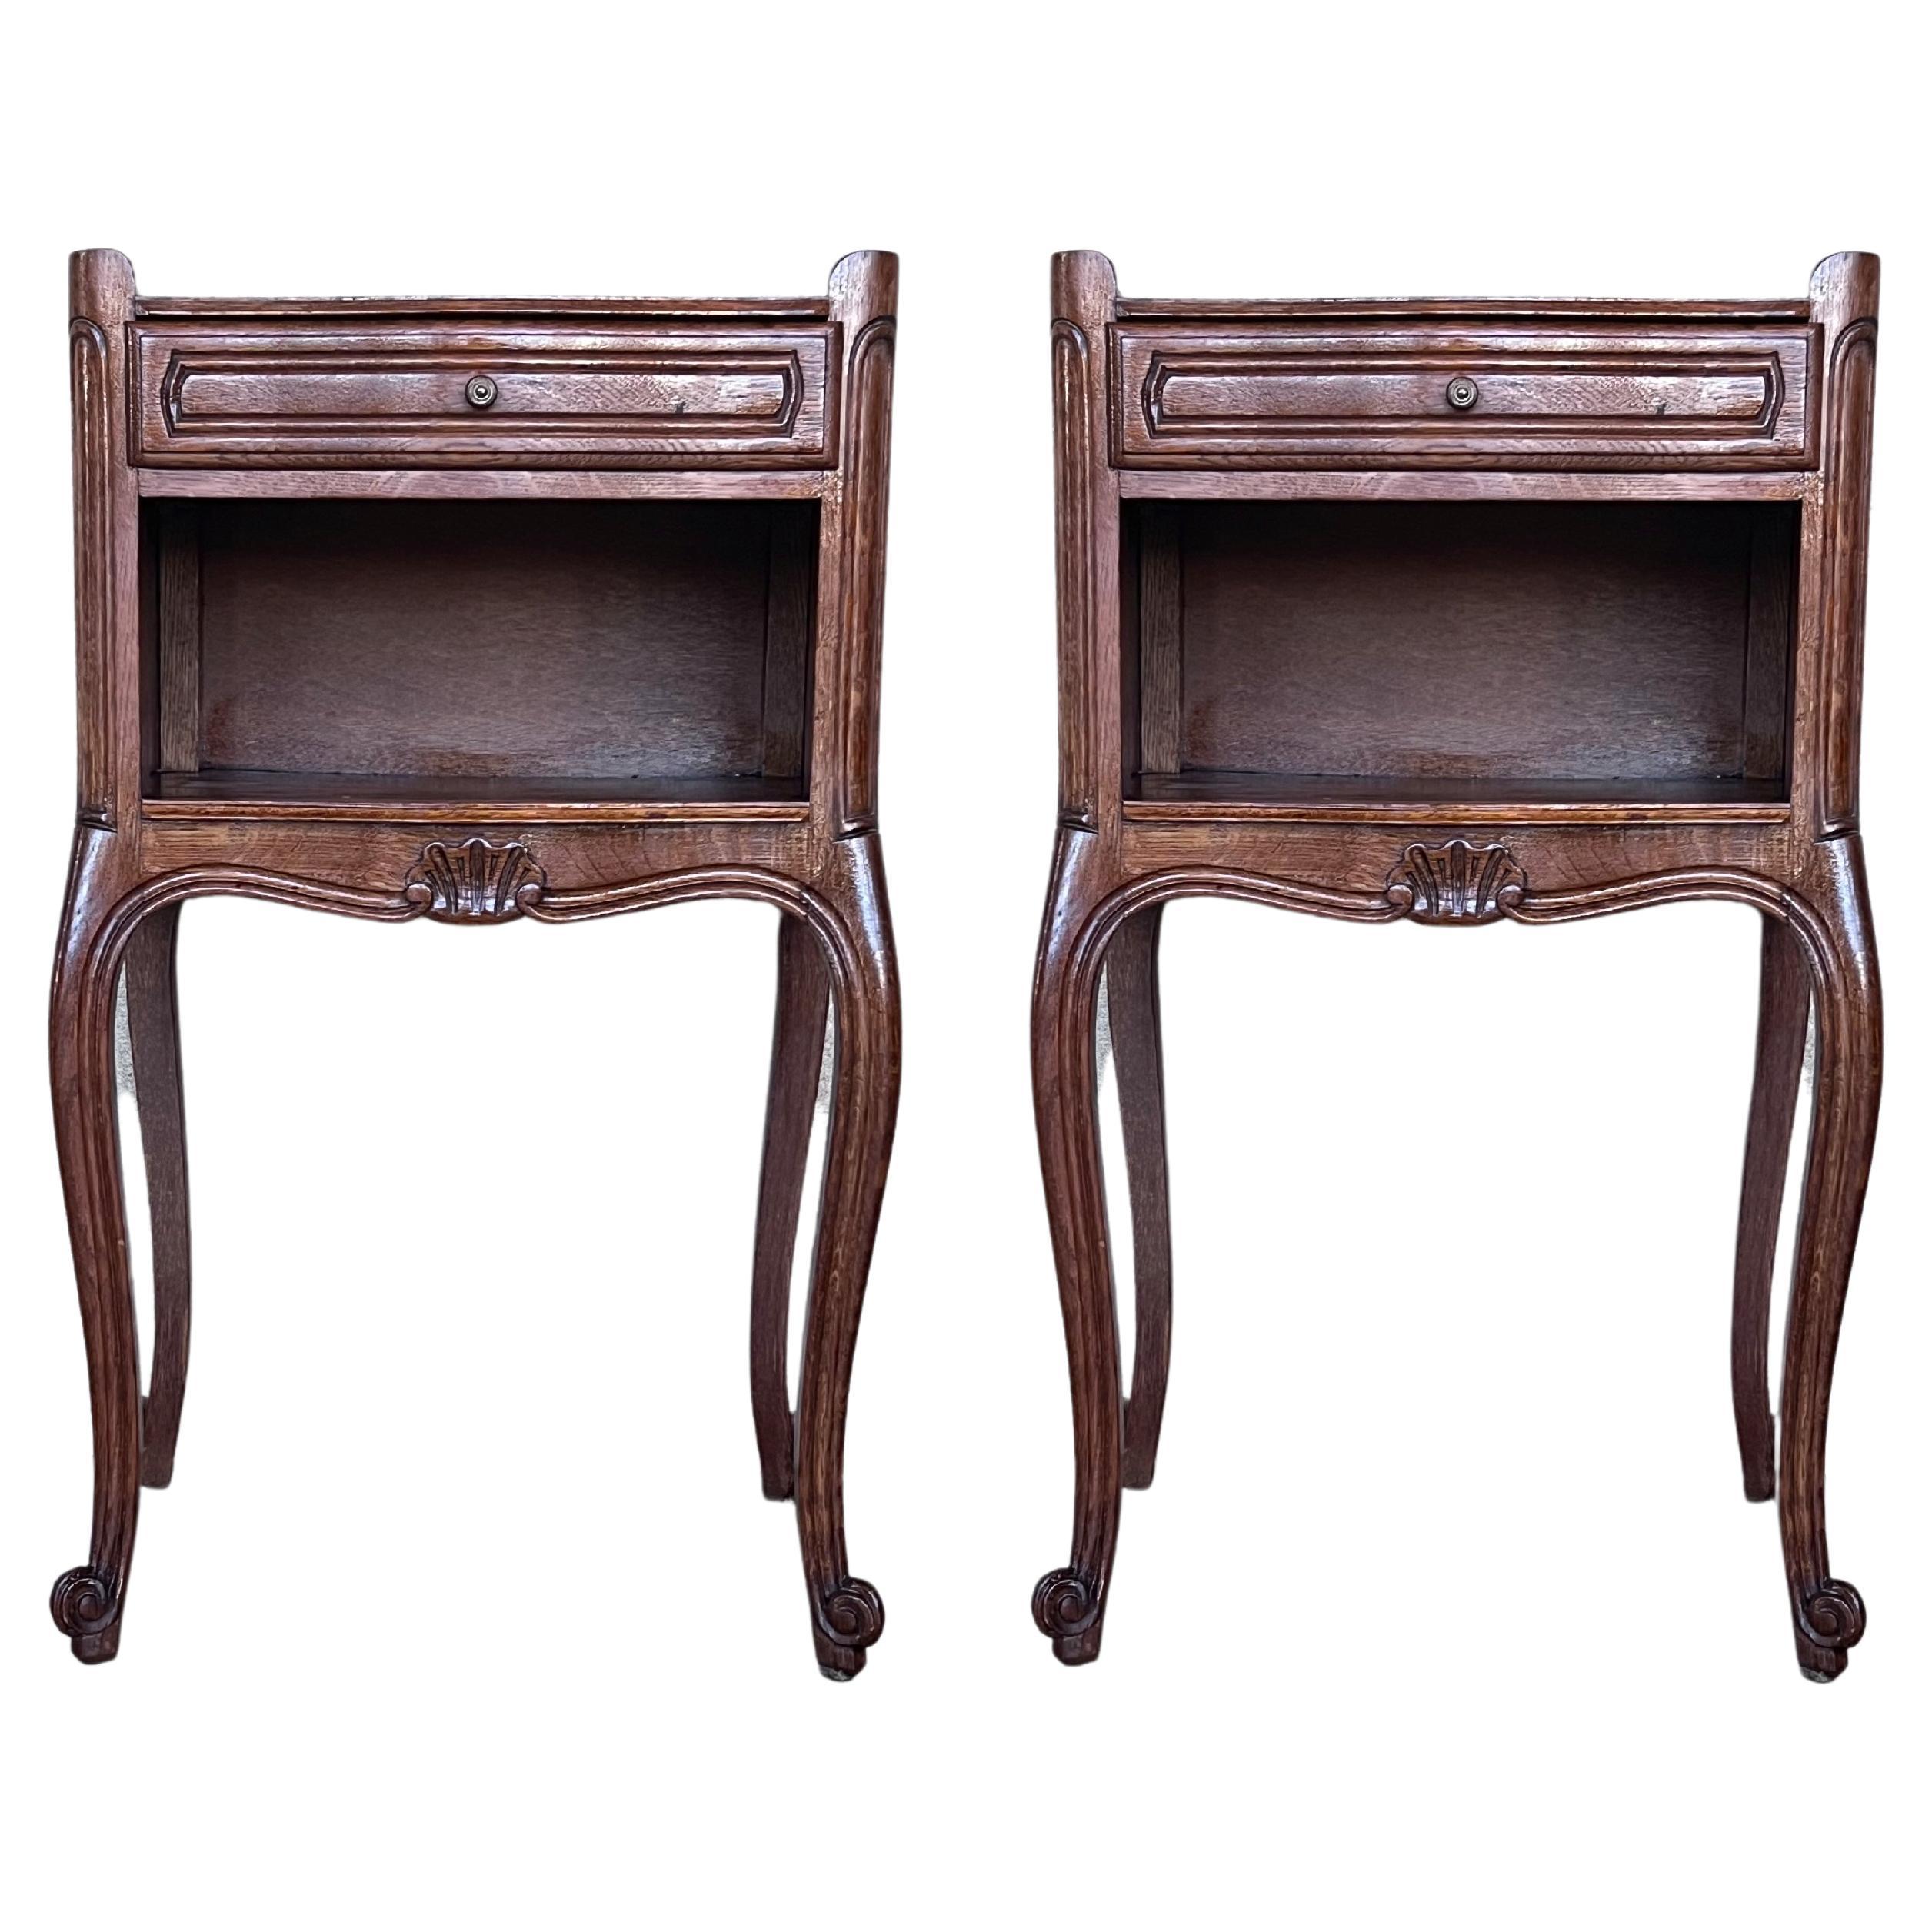 20th Pair of Walnut Nightstands Tables with Drawer and Open Shelf